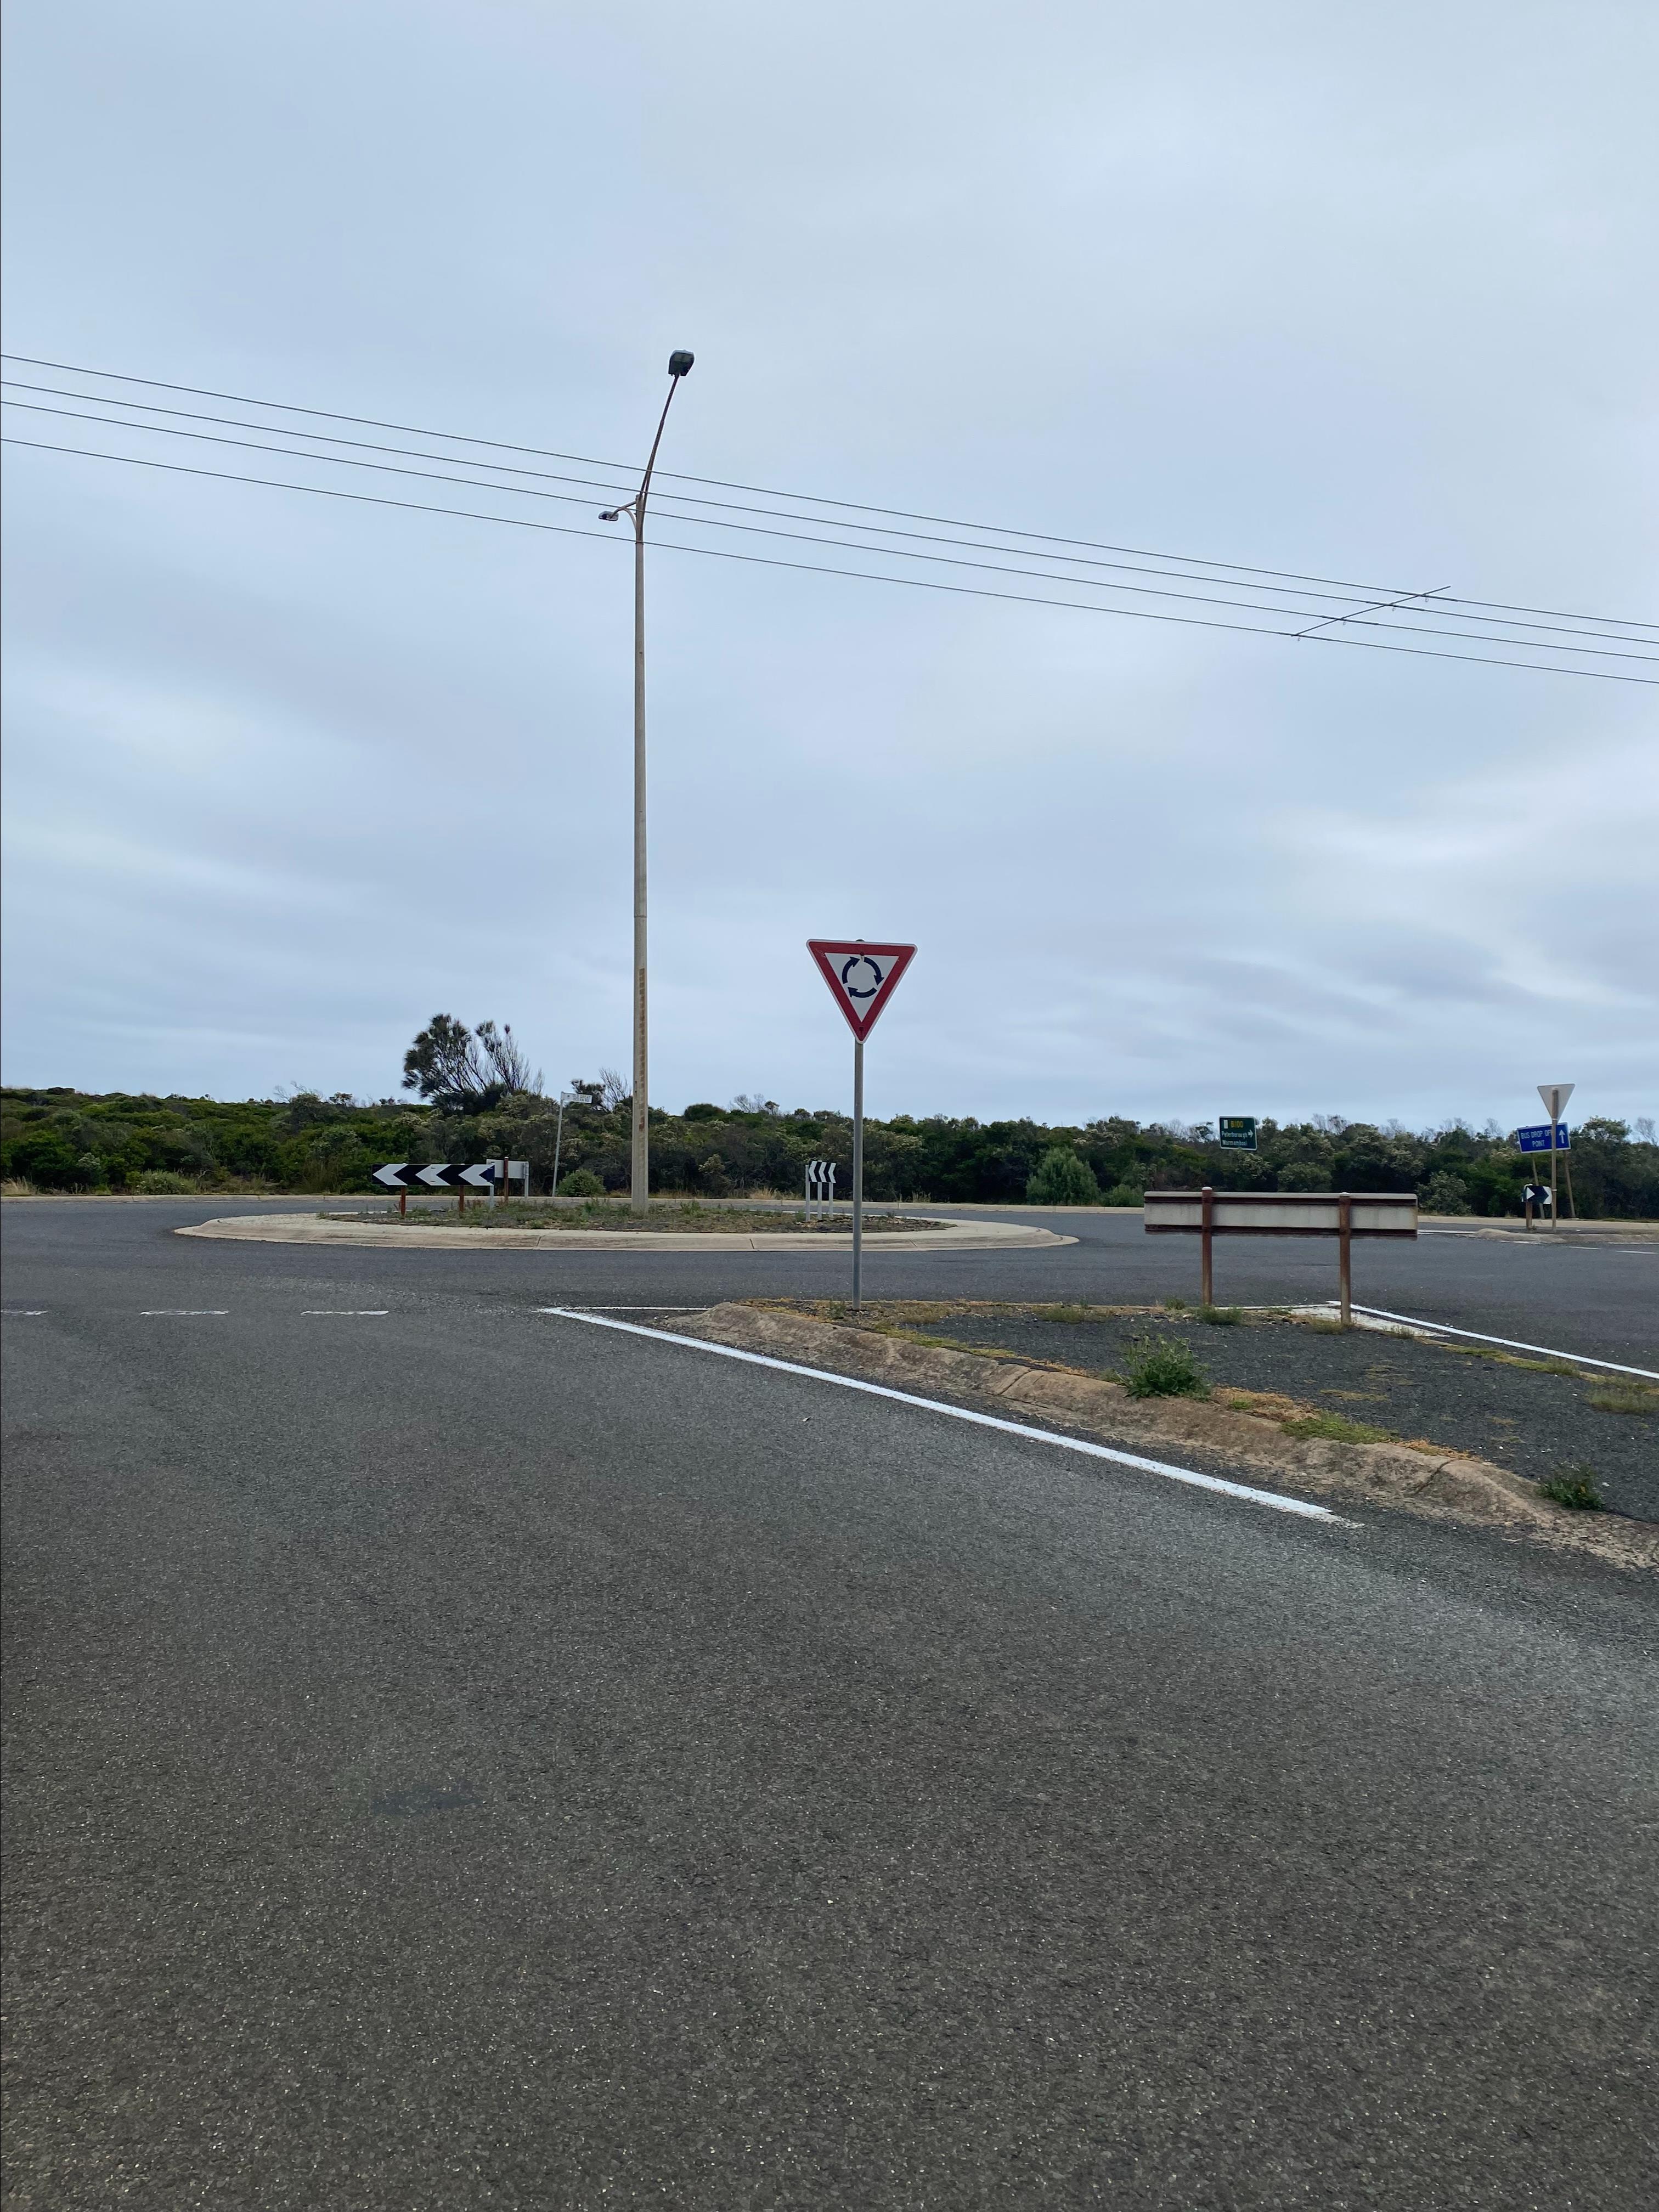 A roundabout on the Great Ocean Road/Morris Street in Port Campbell. There is a street light in the centre of the roundabout.